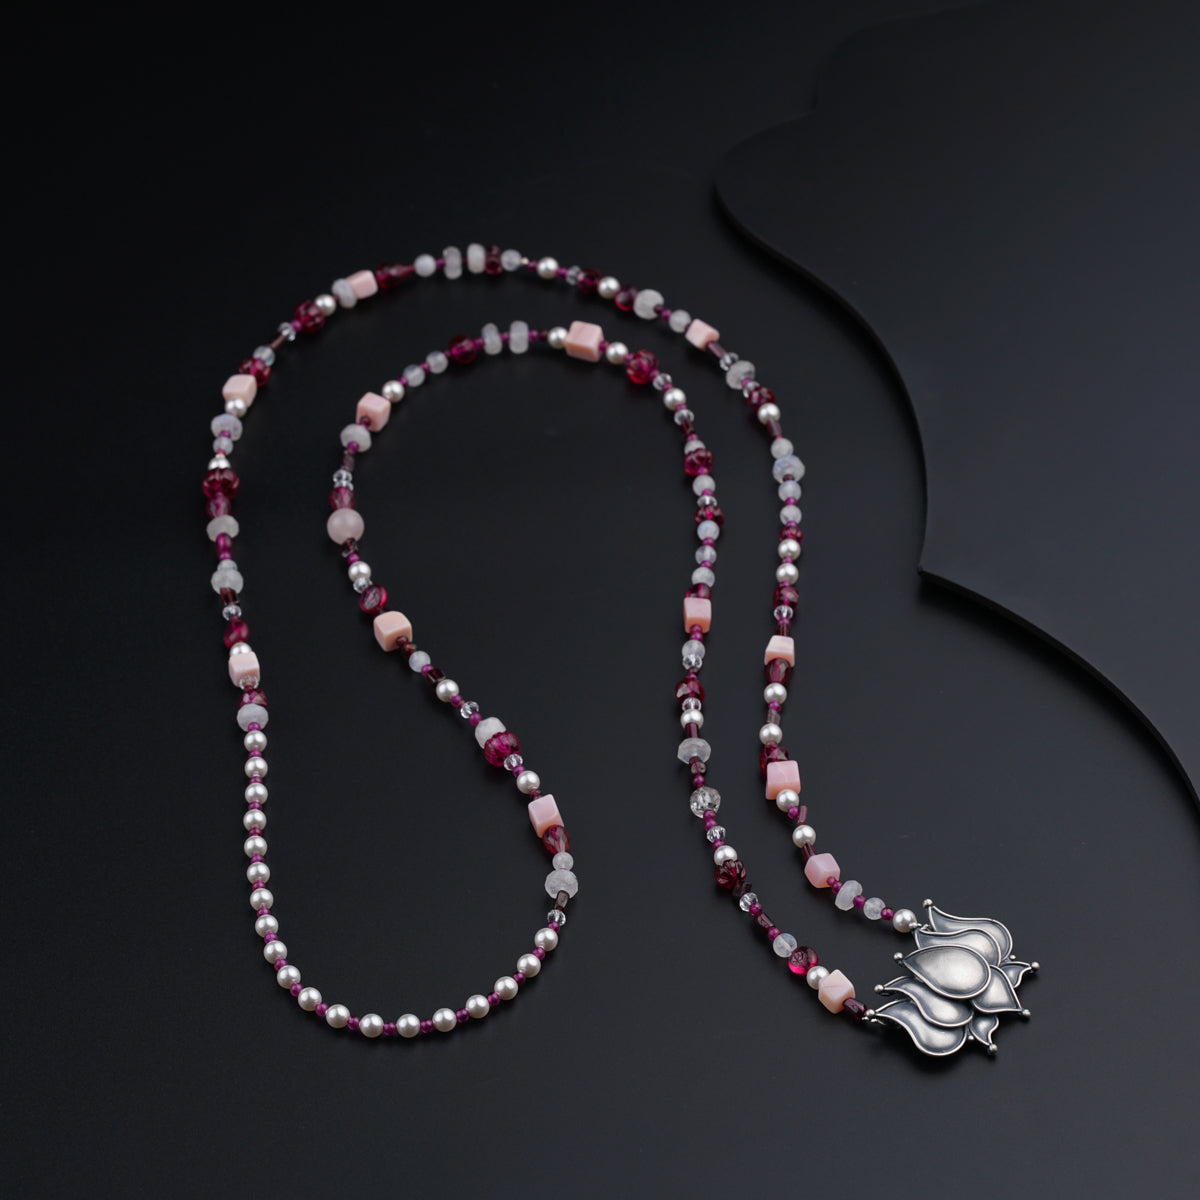 a beaded necklace with a silver cross on it